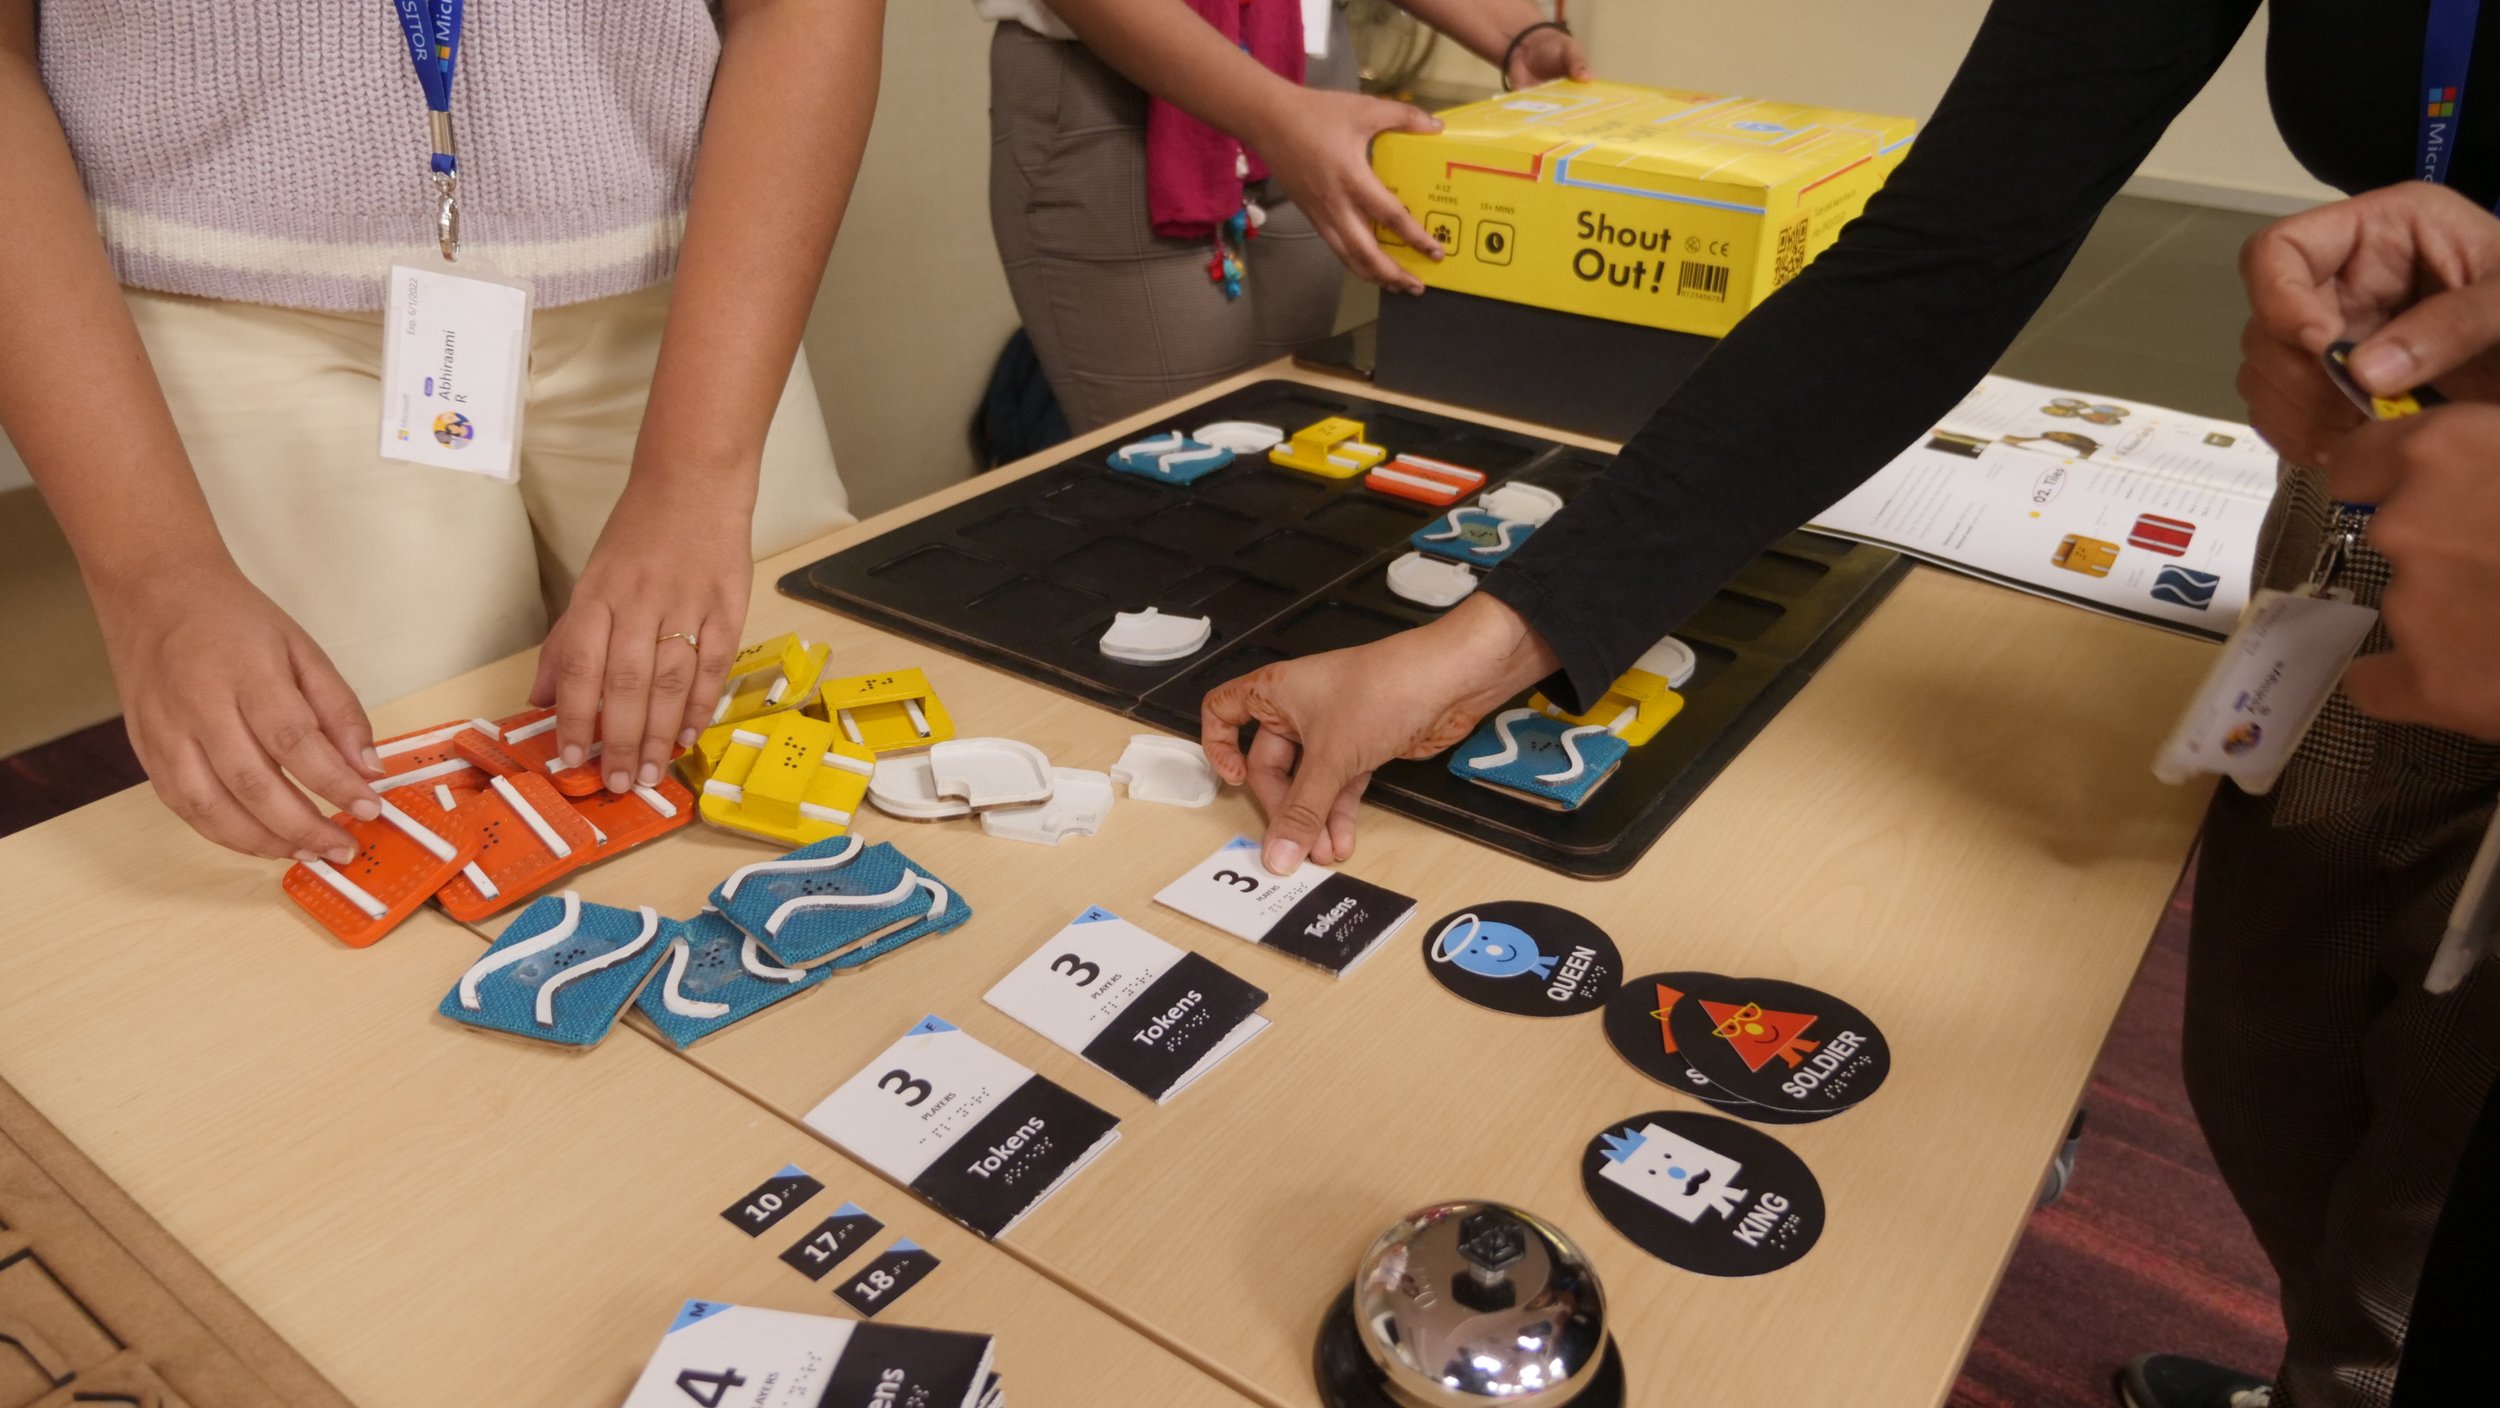 Shout Out - A social role-play game for the visually impaired